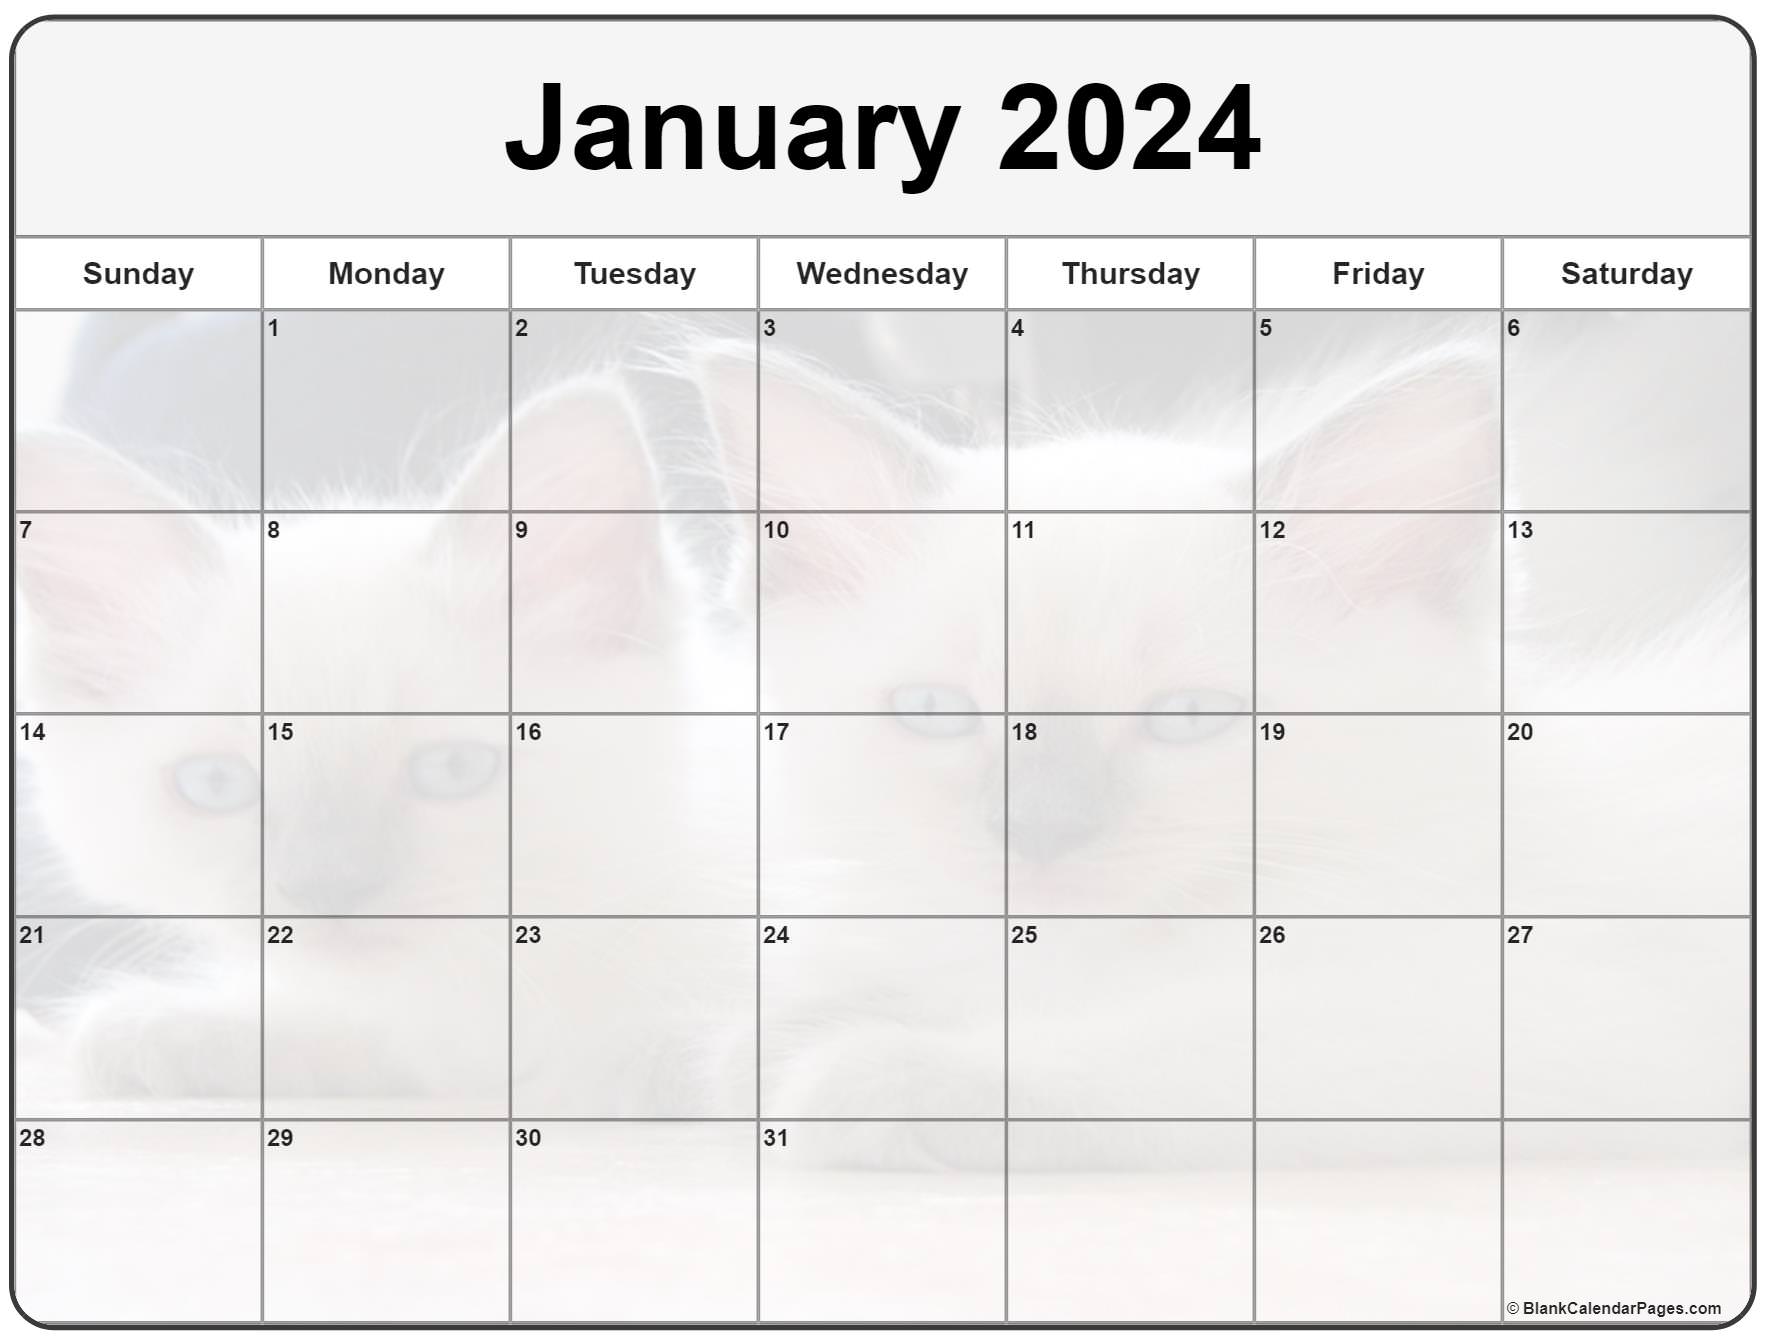 Collection of January 2024 photo calendars with image filters.